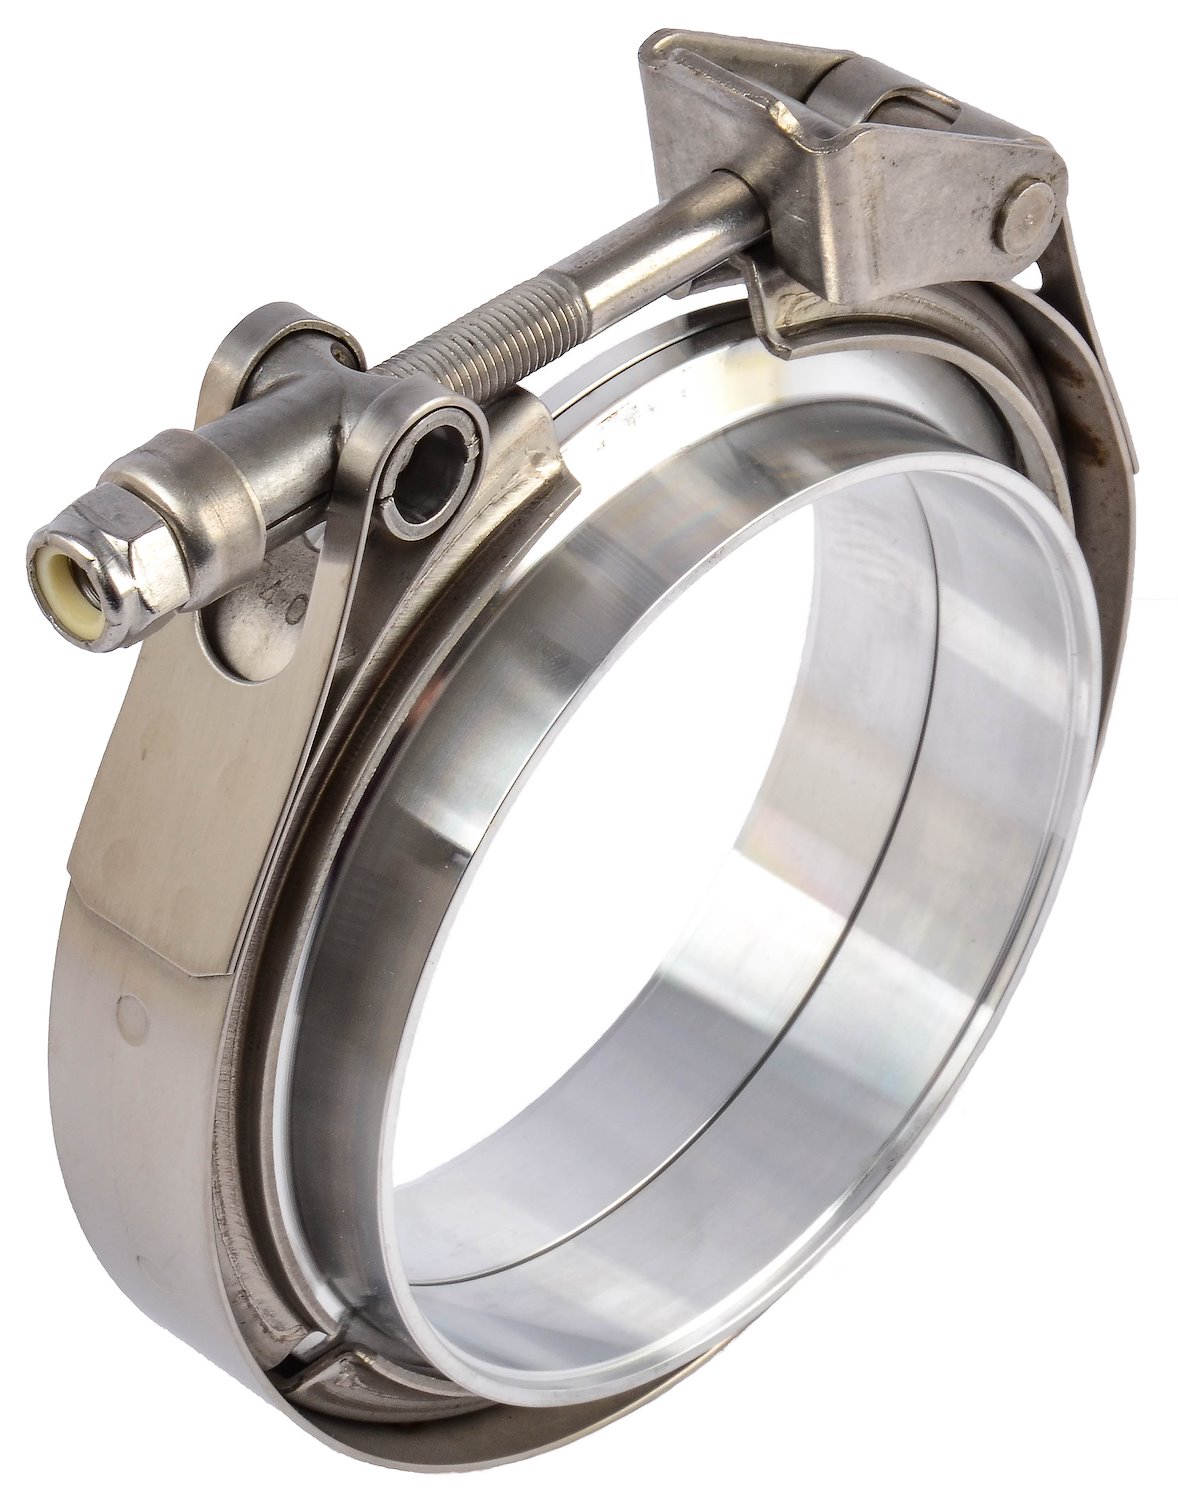 Stainless Steel Quick Release V-Band Clamp & Aluminum Flanges 4 in.